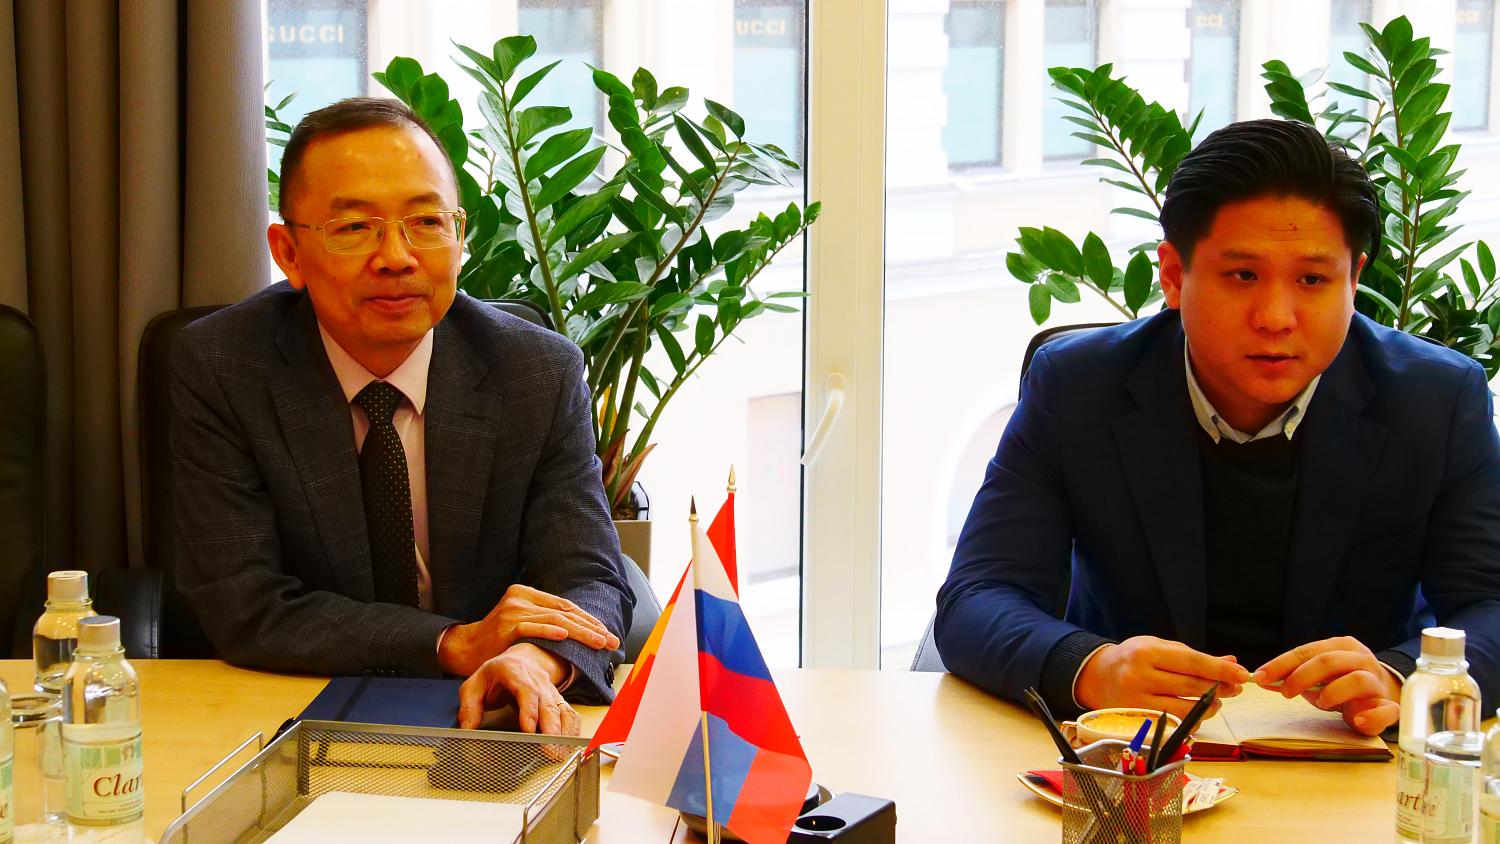 Moscow and Vietnamese entrepreneurs have opportunities for cooperation